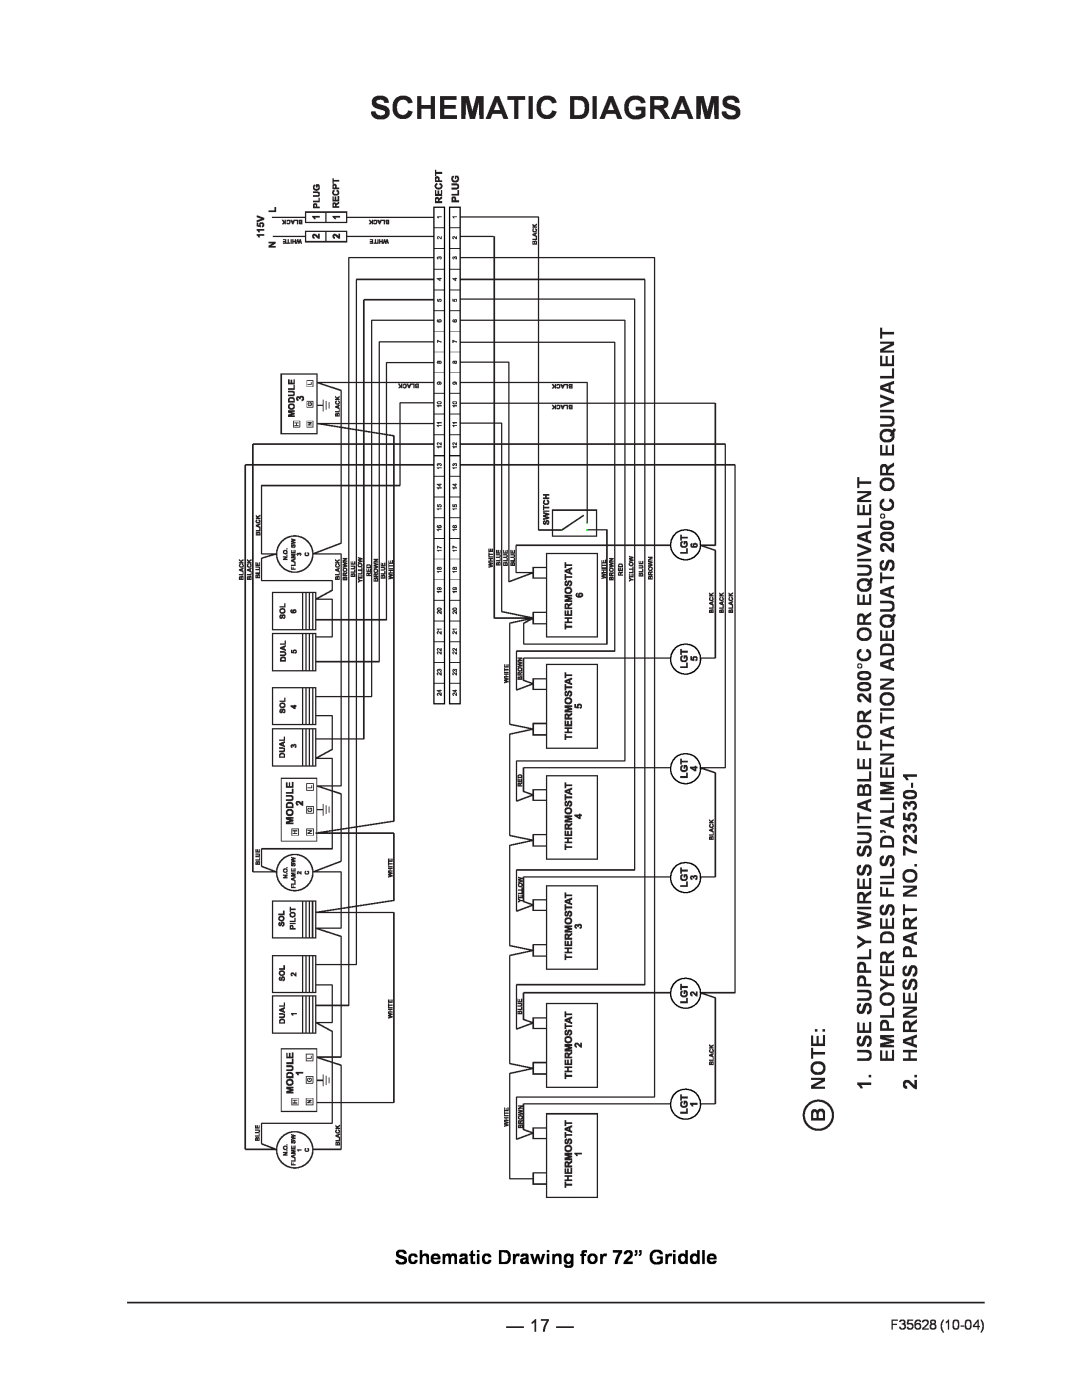 Vulcan-Hart service manual Schematic Drawing for 72” Griddle, Schematic Diagrams, F35628 